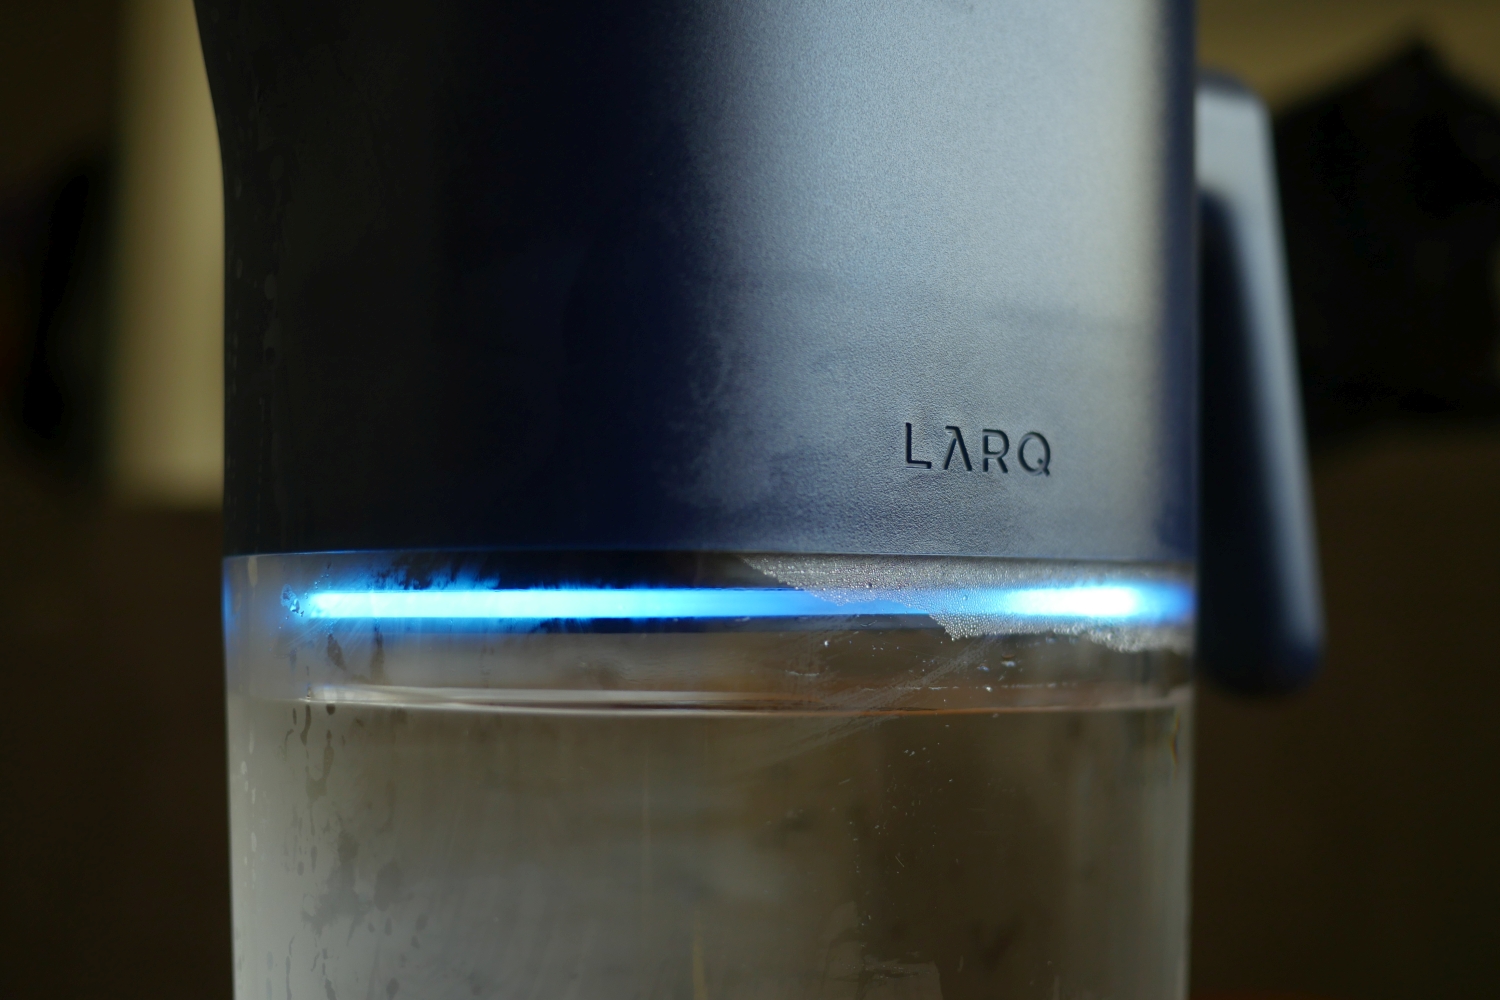 Review: The LARQ PureVis makes lake water drinkable